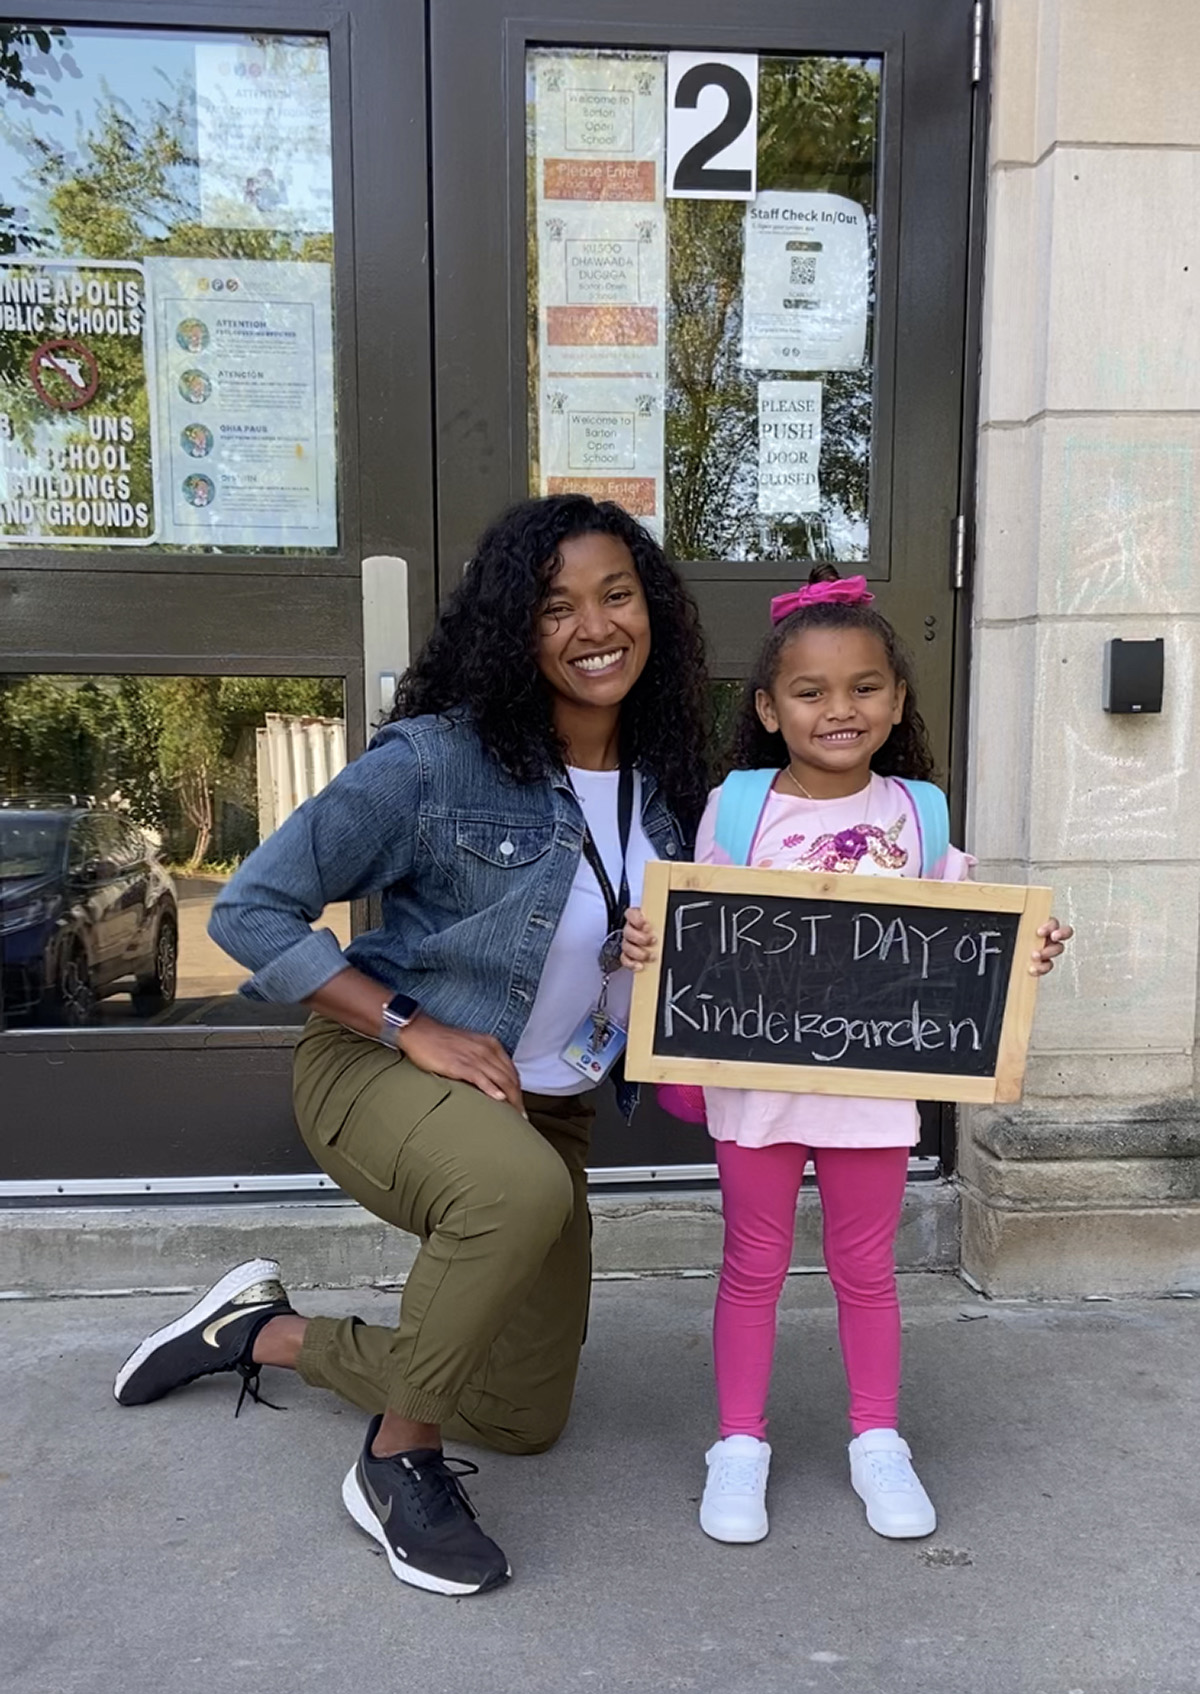 PHOTO: Lindsey West, a fifth grade teacher at Clara Barton Community School, seen here with her daughter on her first day of school in Minneapolis.